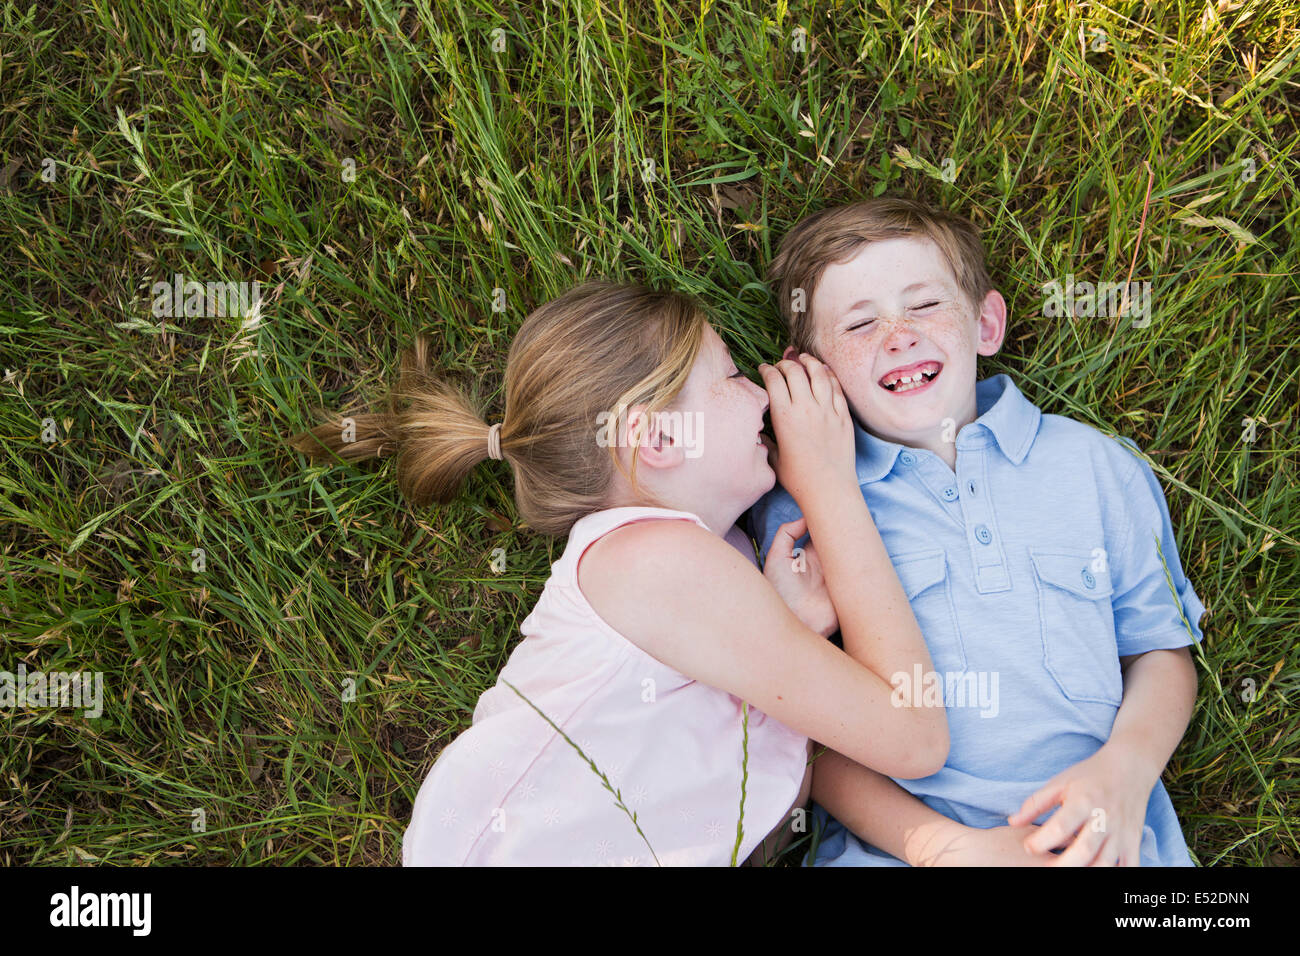 Two children, brother and sister lying side by side on the grass Stock Photo